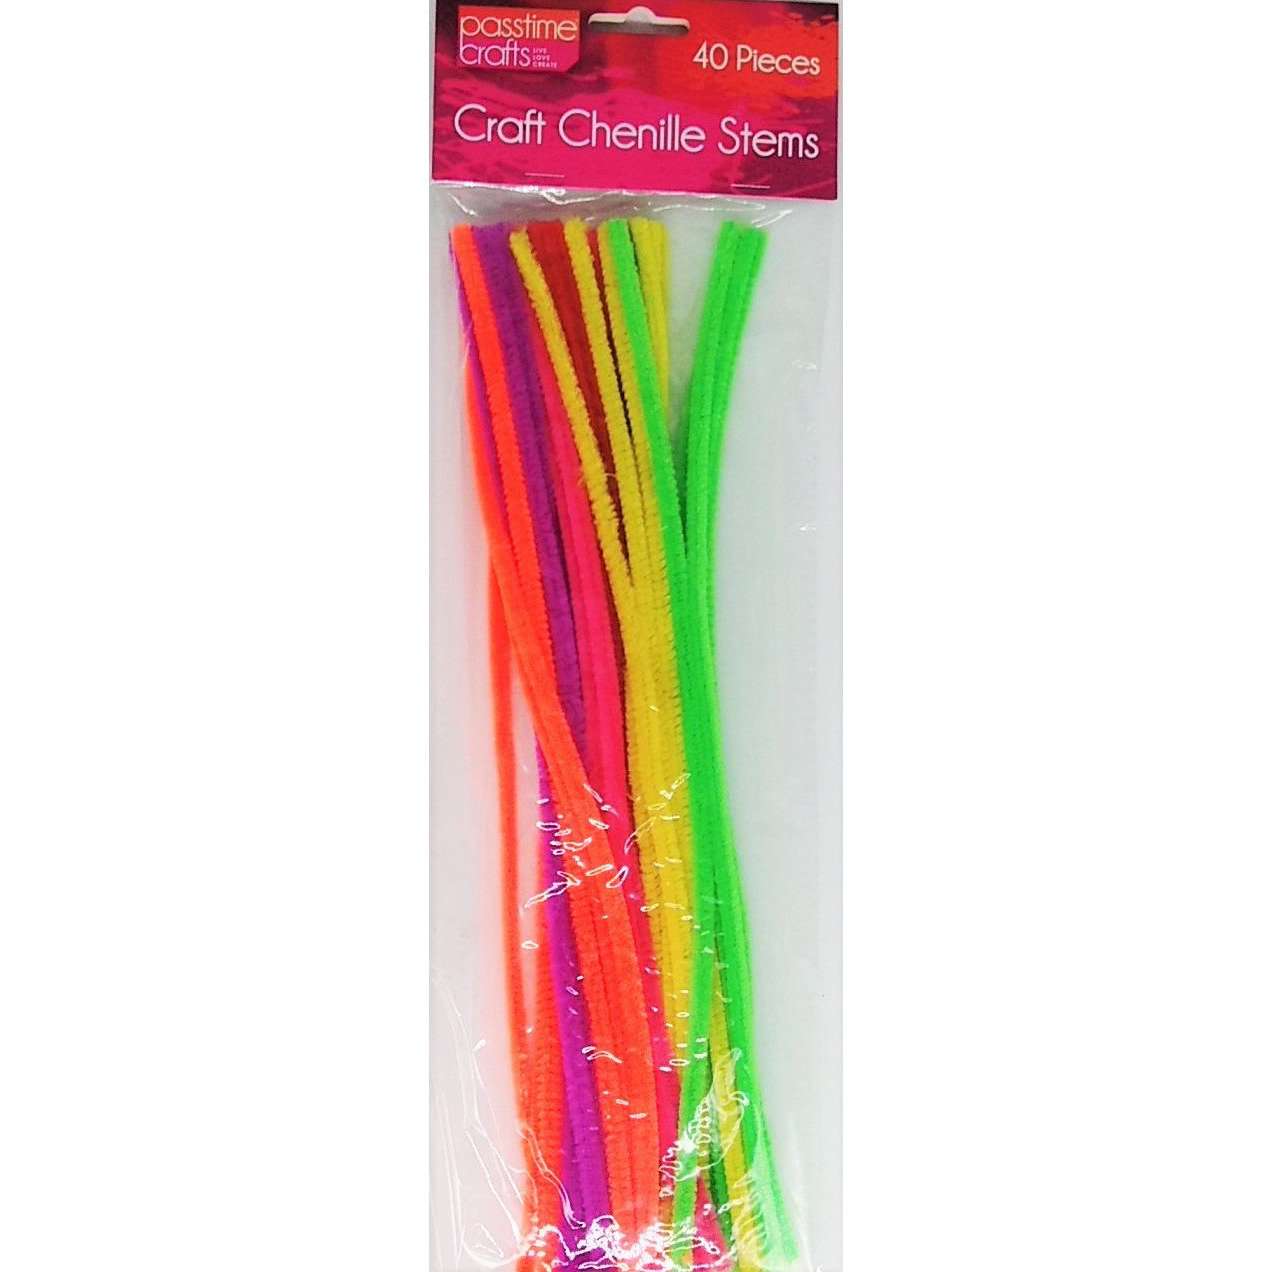 Buy onilne Mont Marte Craft Chenille Stems Pipe Cleaners Multi Colours 40 Pack | Dollars and Sense cheap and low prices in australia